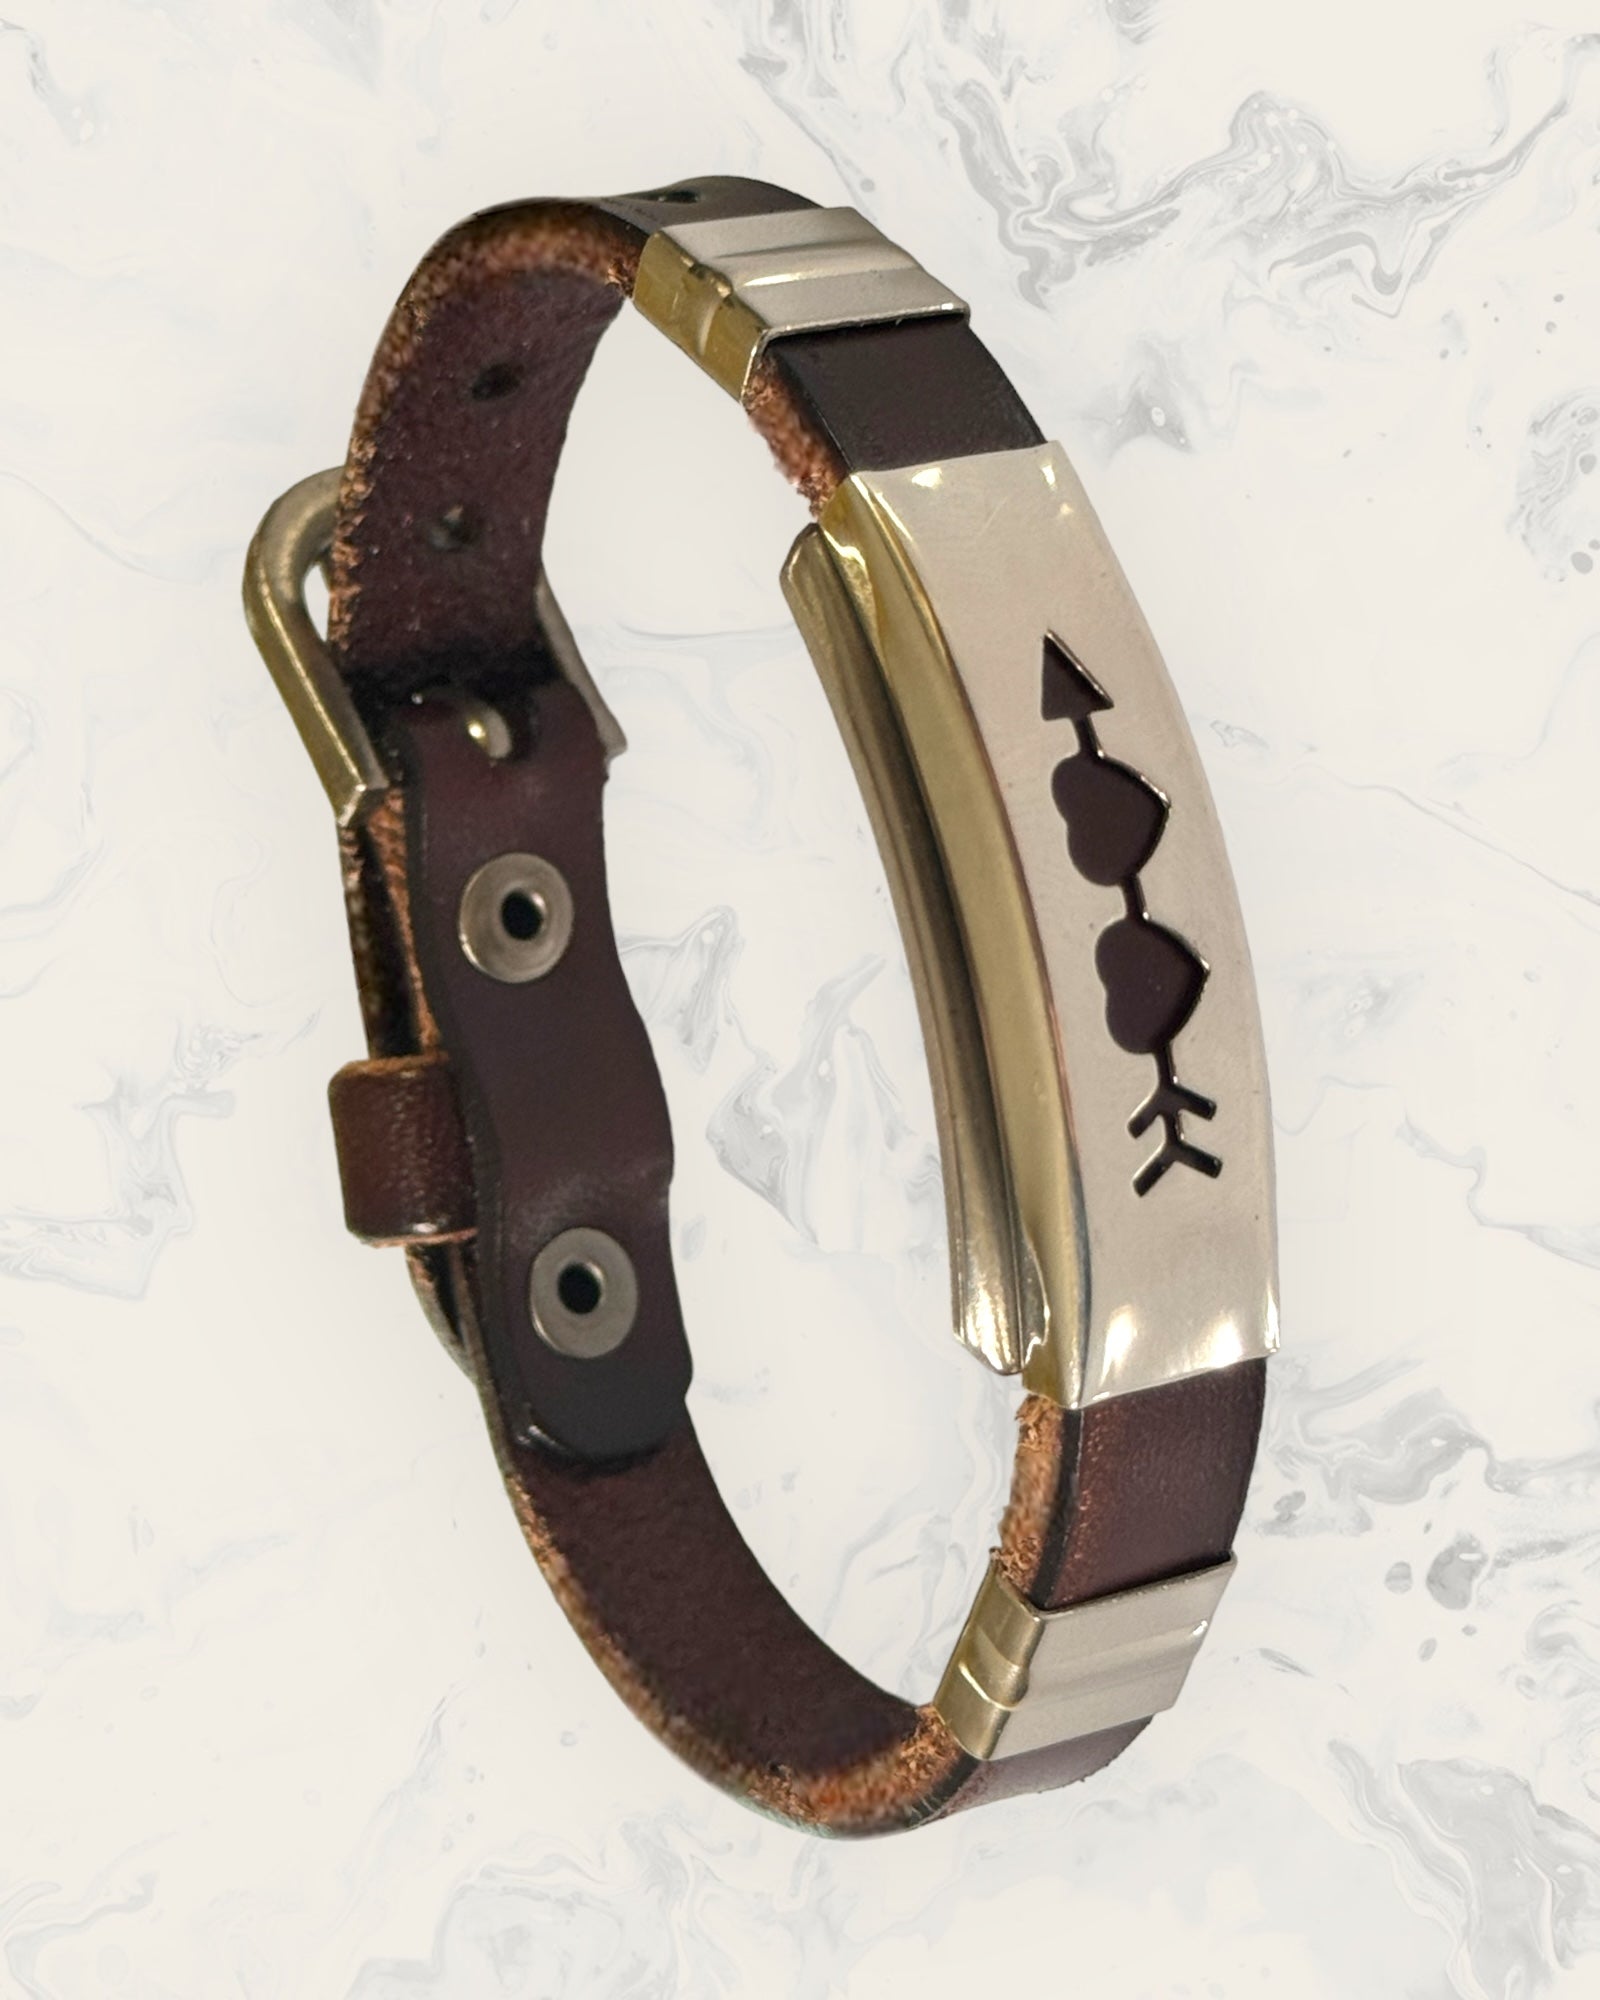 Natural Pain Relief and EMF Protection Bracelet Leather Band Color Dark Brown with Two Hearts and an arrow design on a silver metal slider